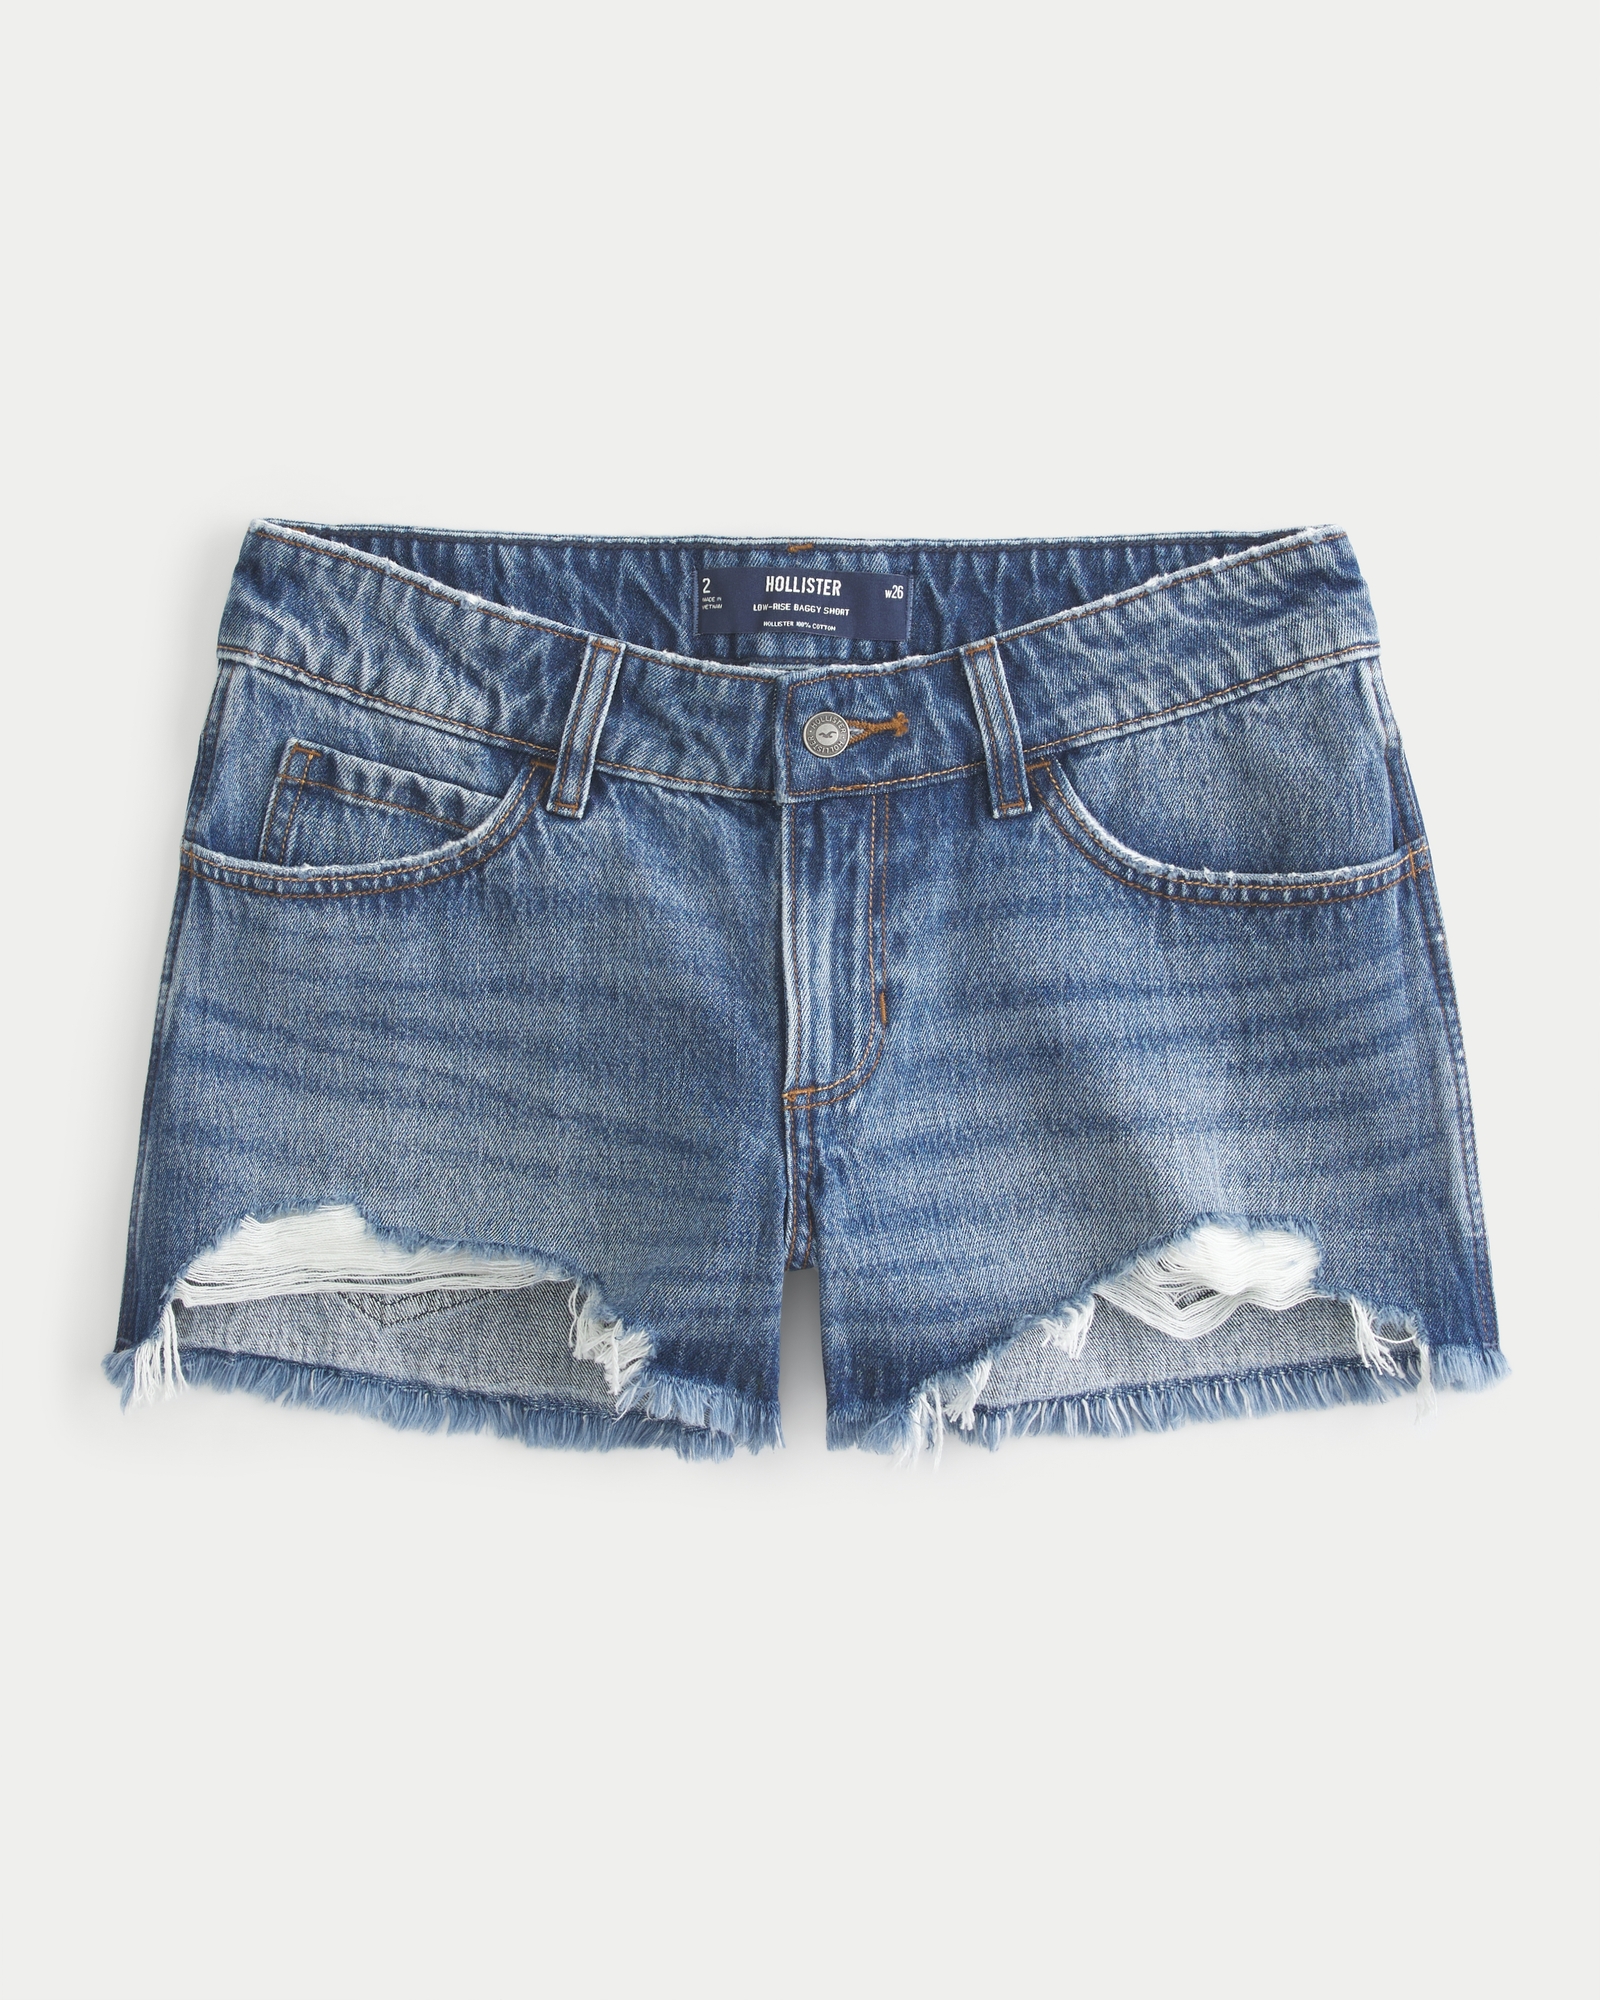 https://img.hollisterco.com/is/image/anf/KIC_349-4151-0082-278_prod1.jpg?policy=product-extra-large